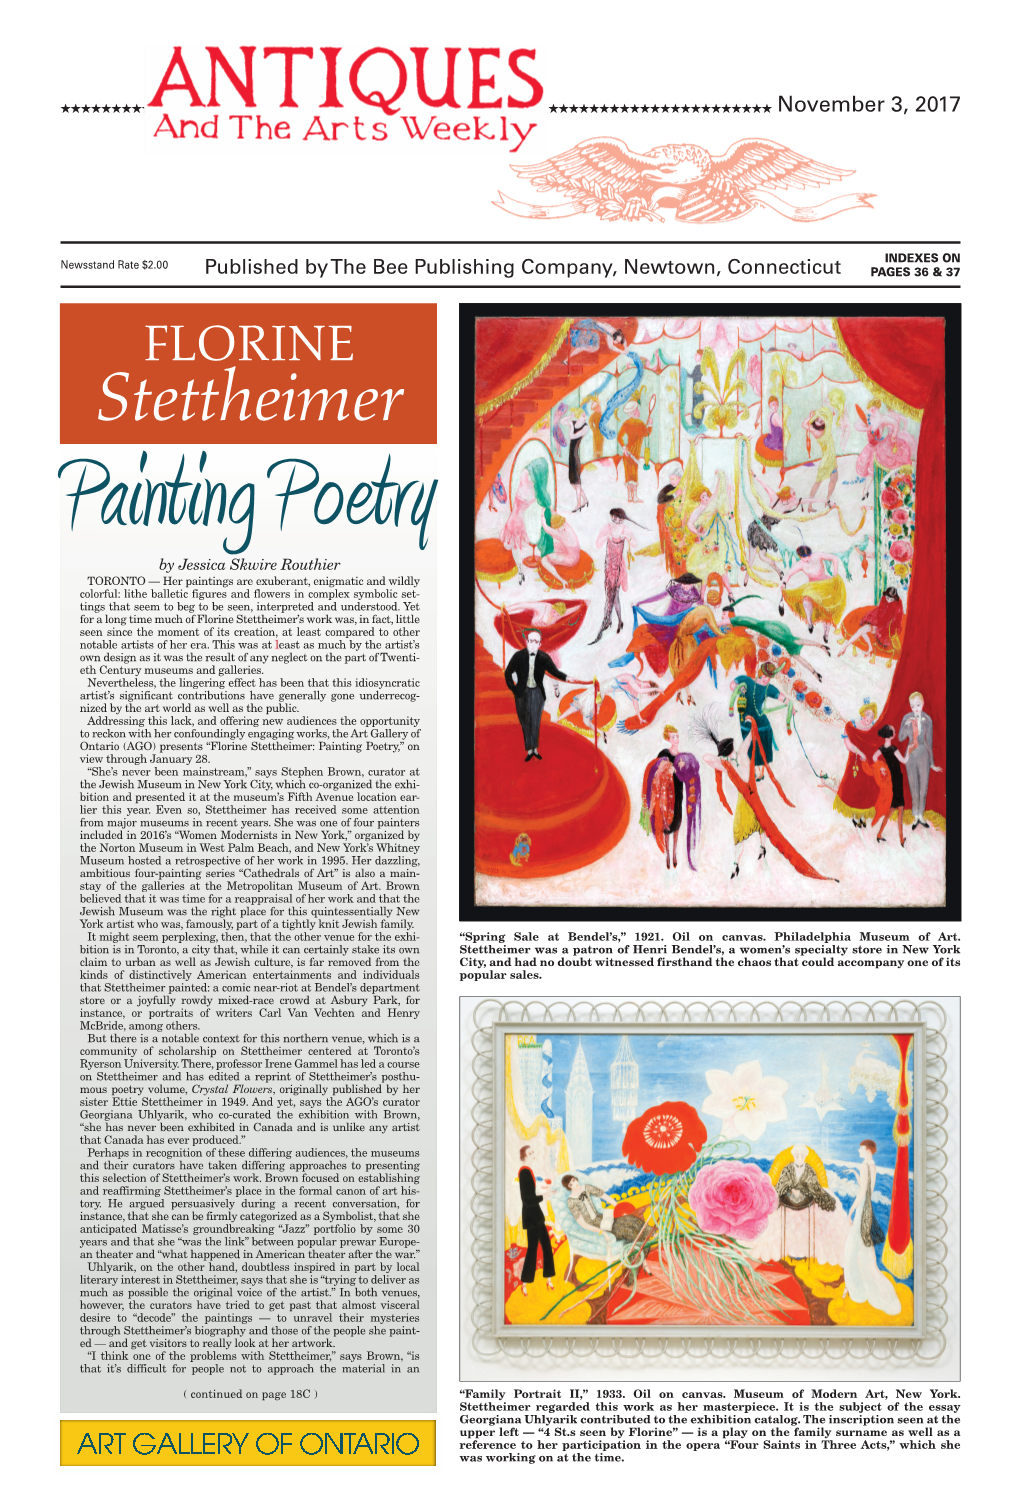 Florine Stettheimer: Painting Poetry,” on View Through January 28